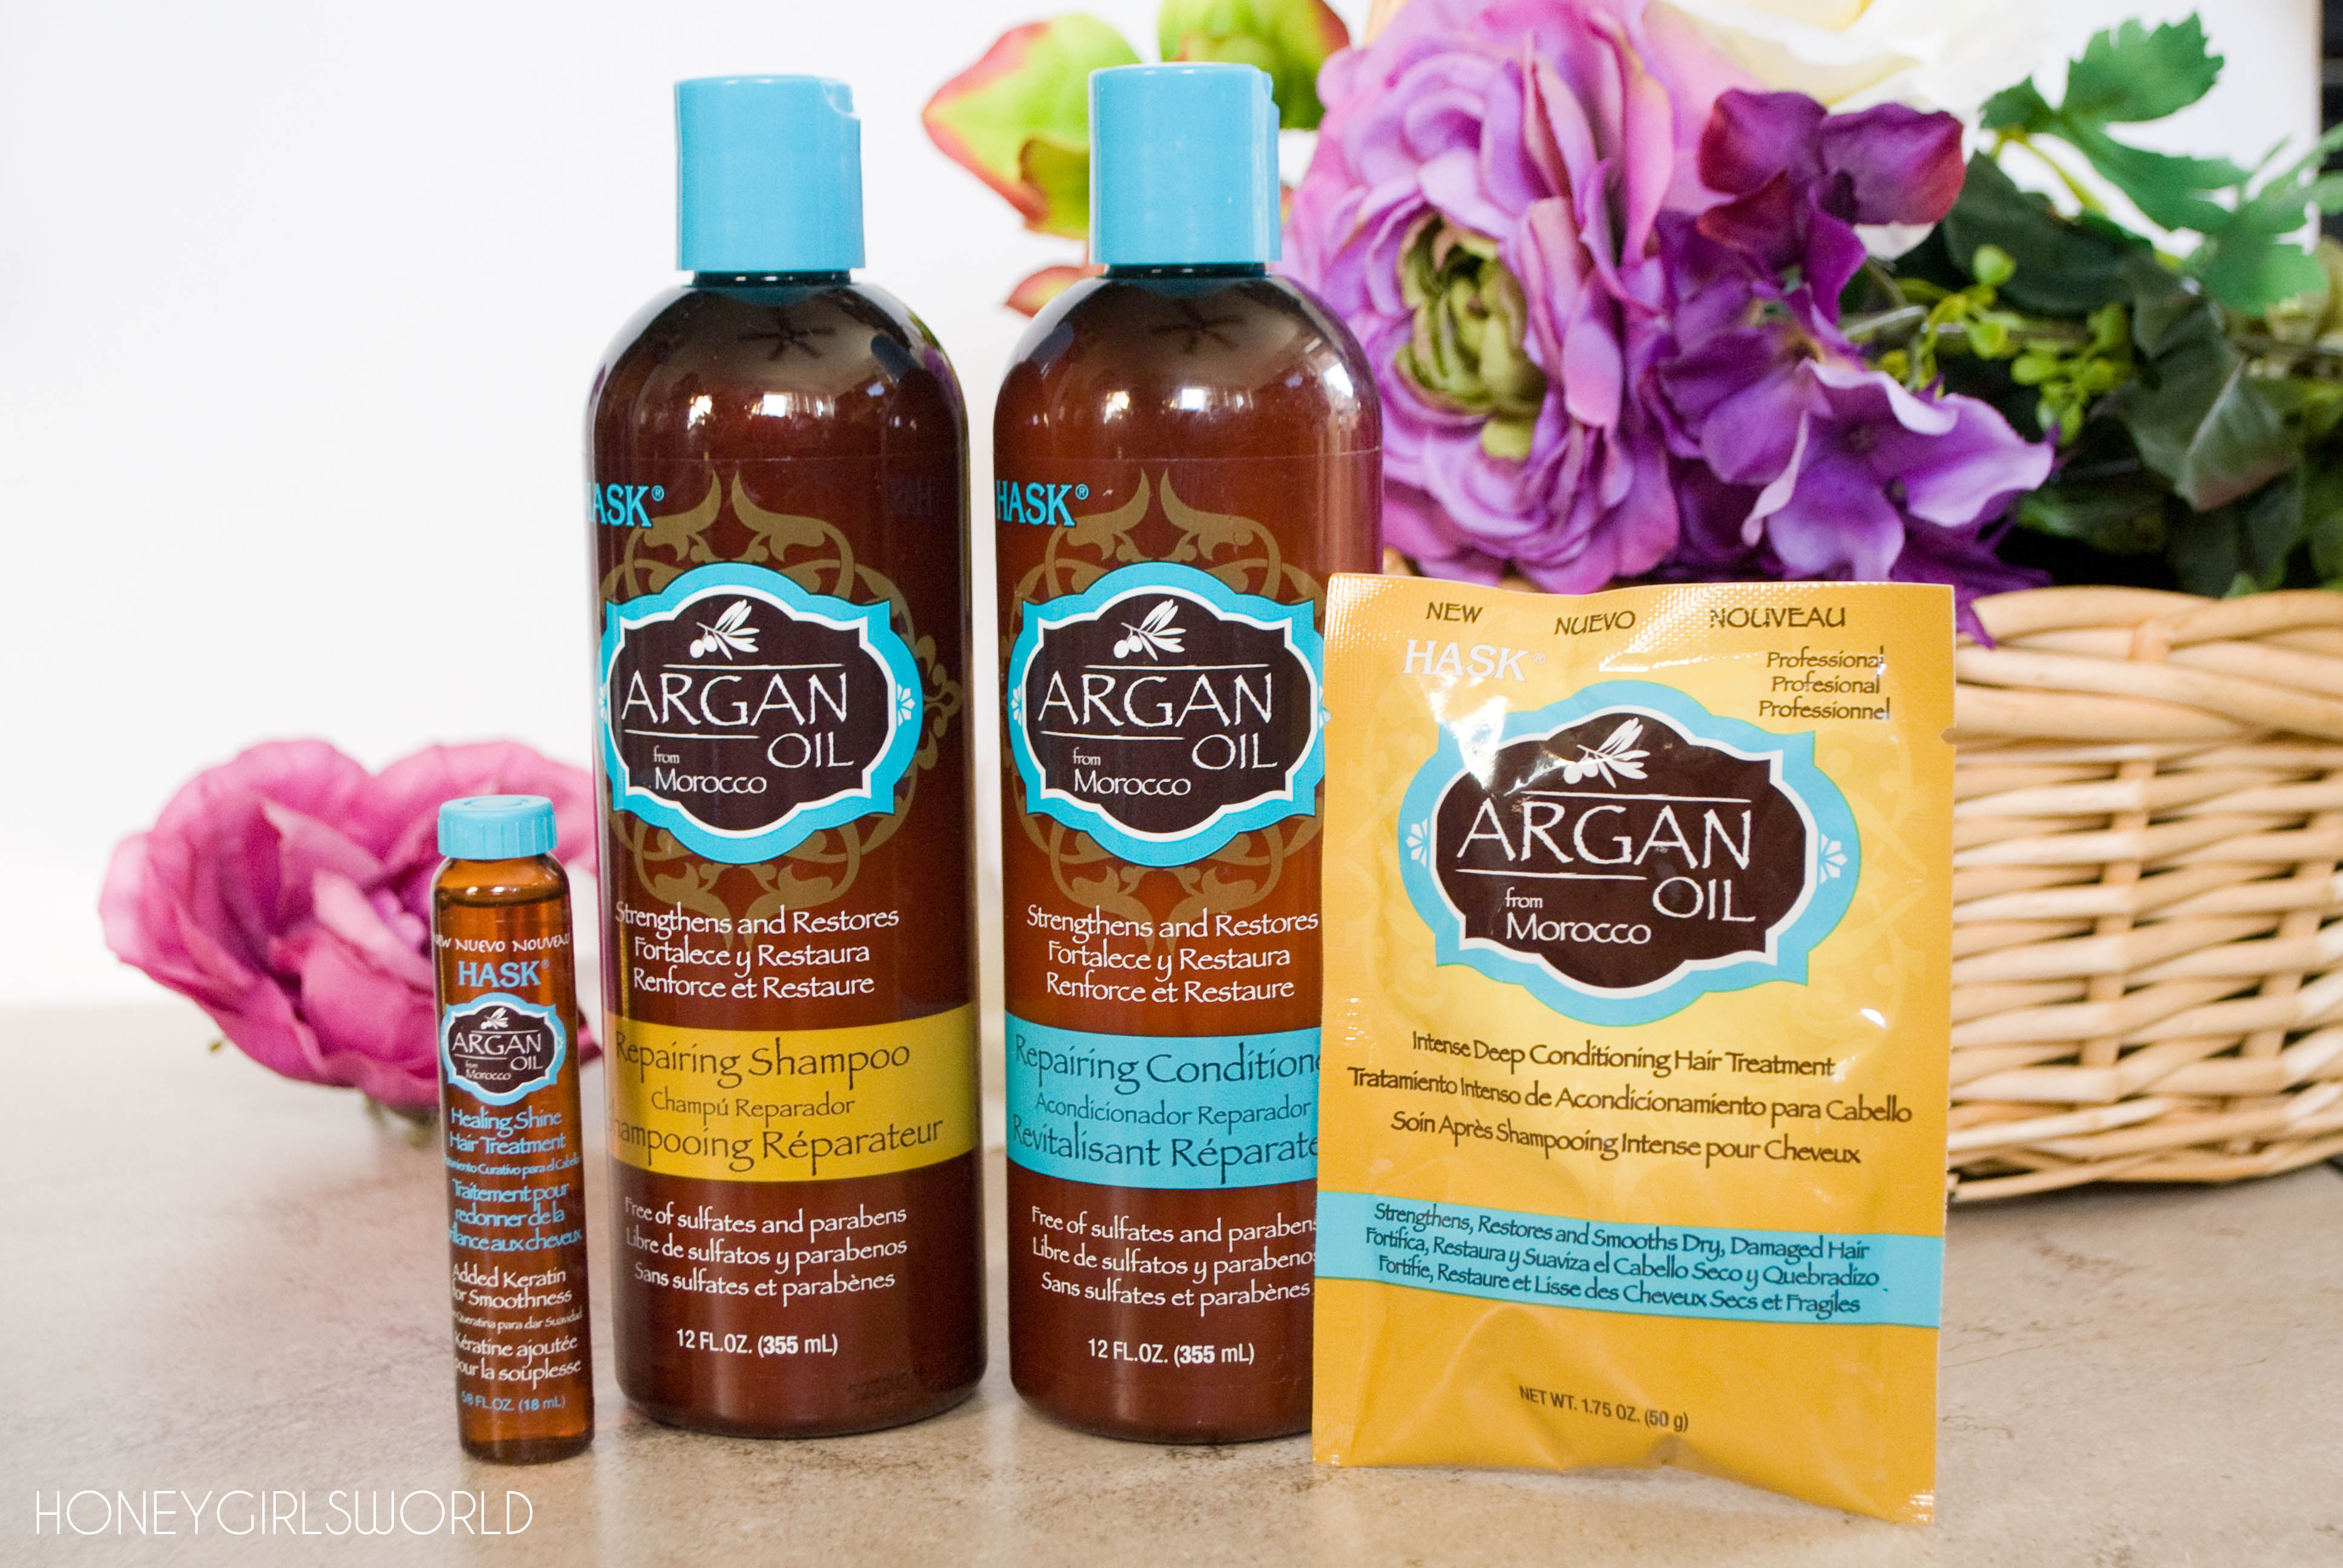 Hask Beauty - Argan Oil Products